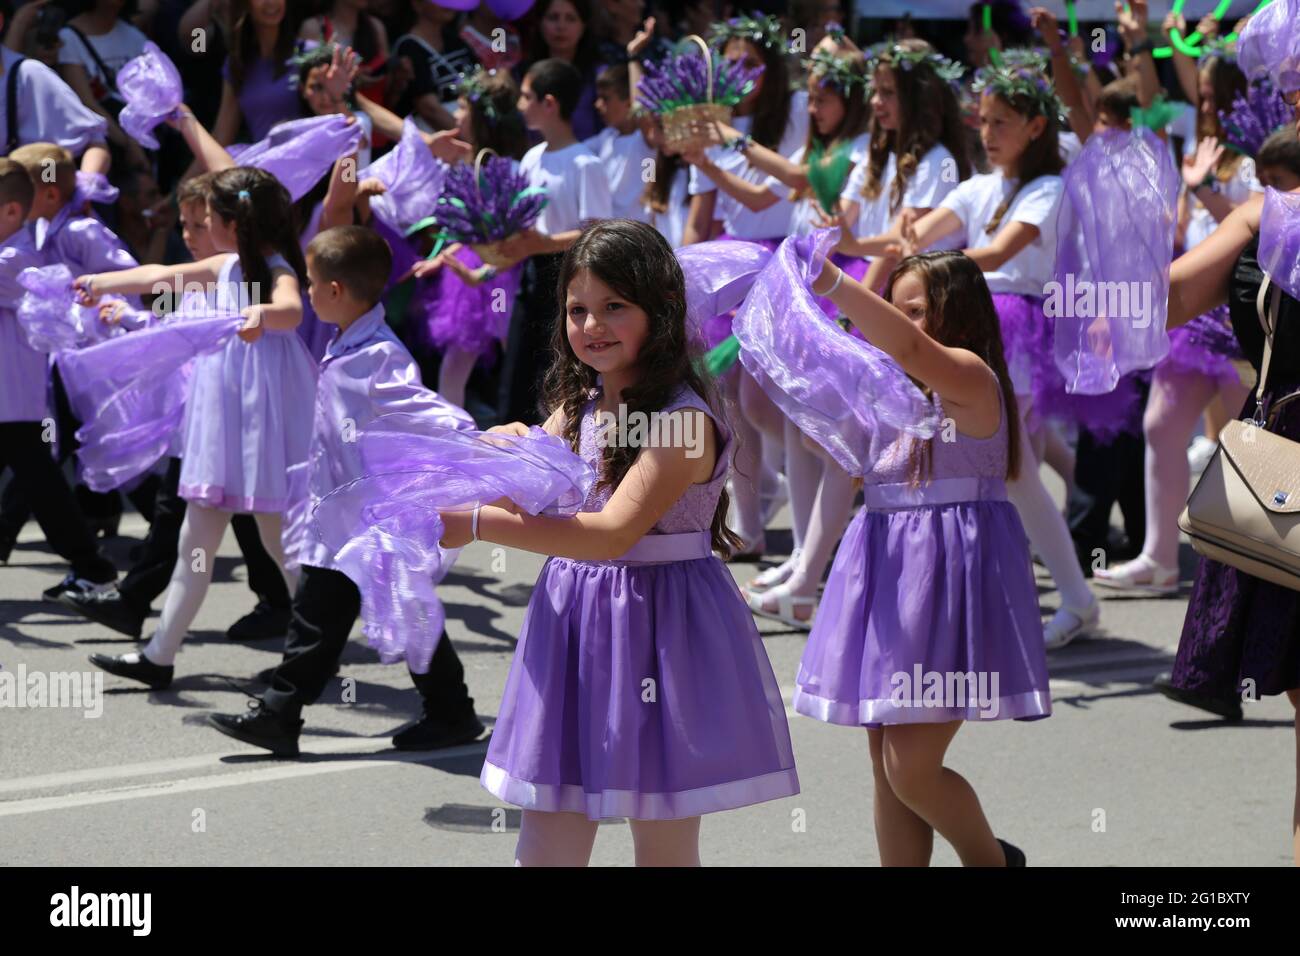 Kazanlak, Bulgaria. 6th June, 2021. Children participate in the Rose Festival parade in Kazanlak, Bulgaria, on June 6, 2021. The culmination of the 2021 Rose Festival was witnessed in Kazanlak this weekend. Kazanlak was known for its Rose Festival, which has been organized annually since 1903. The festival celebrates local residents' deep connection to the Rosa Damascena -- the Bulgarian oil-bearing rose -- for centuries. Credit: Lin Hao/Xinhua/Alamy Live News Stock Photo